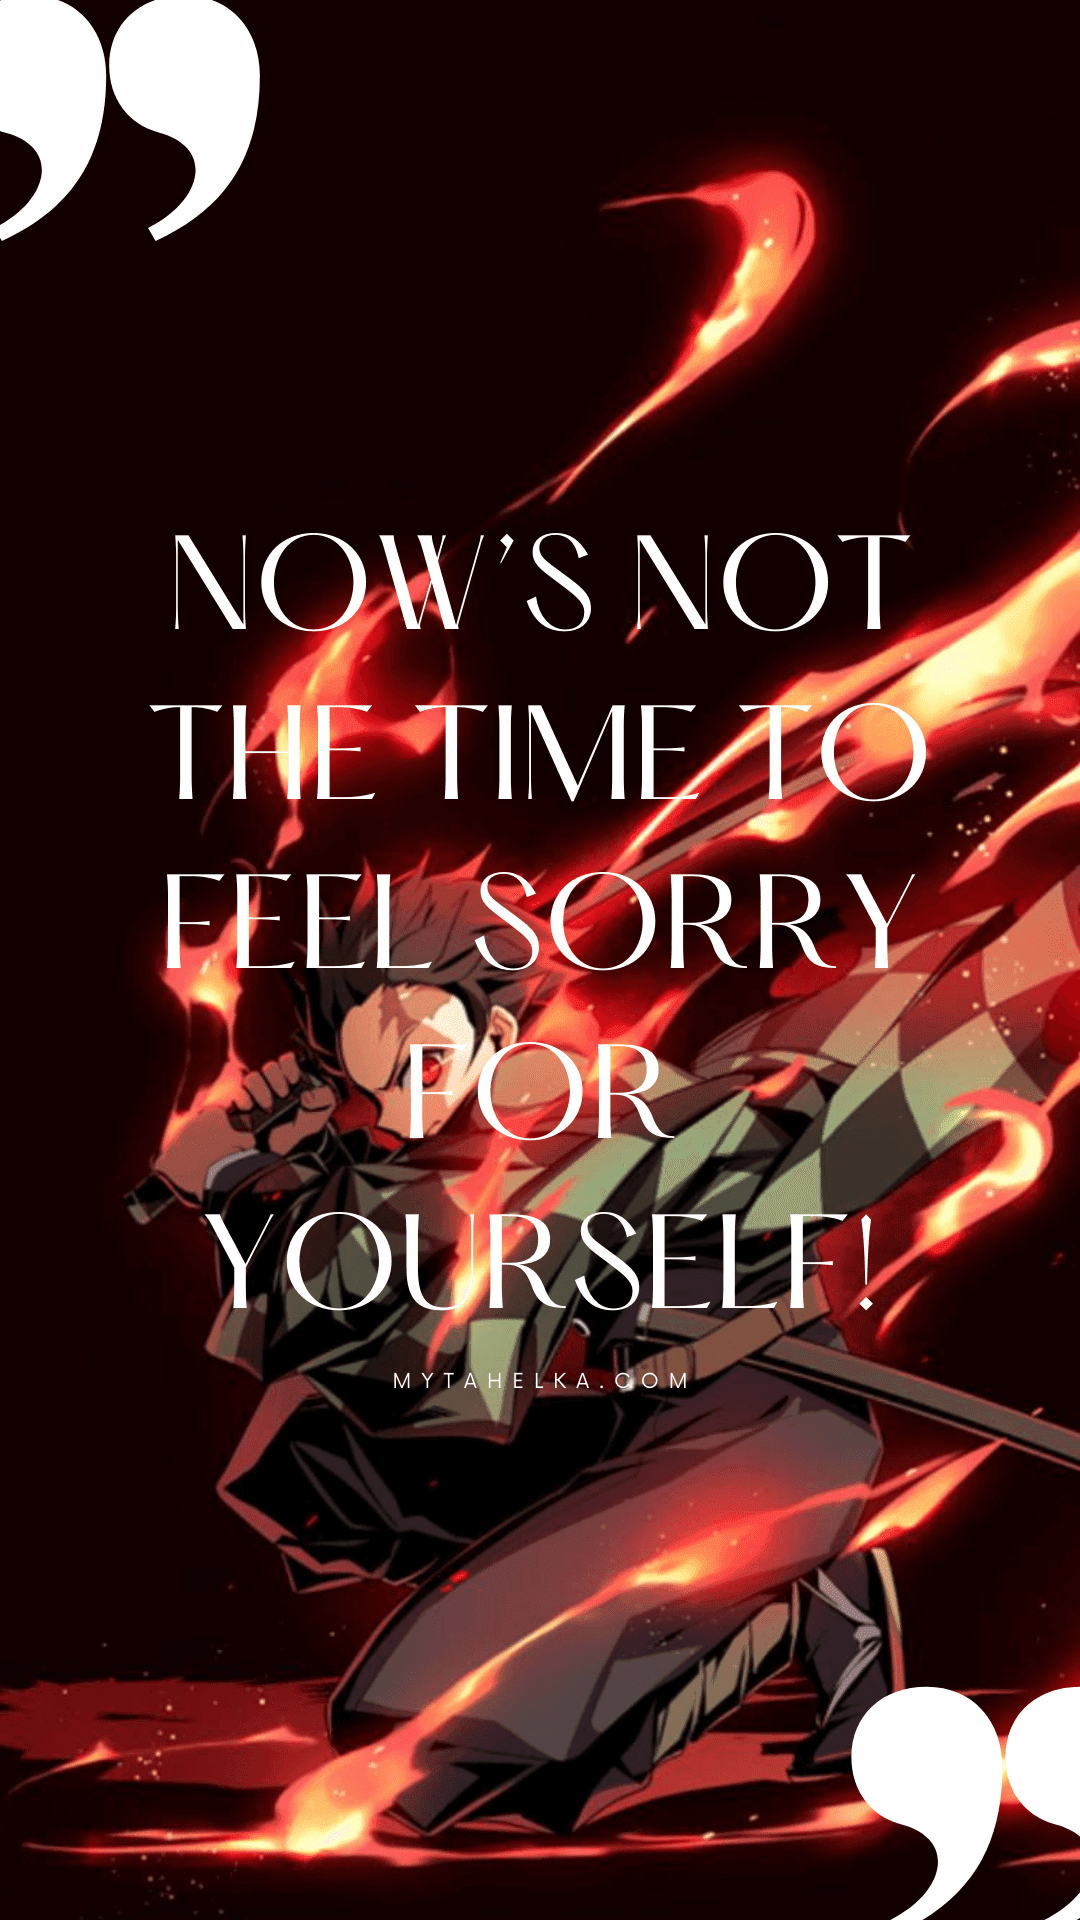 Cool Wallpaper Anime Quotes. Wallpaper with Anime Quotes